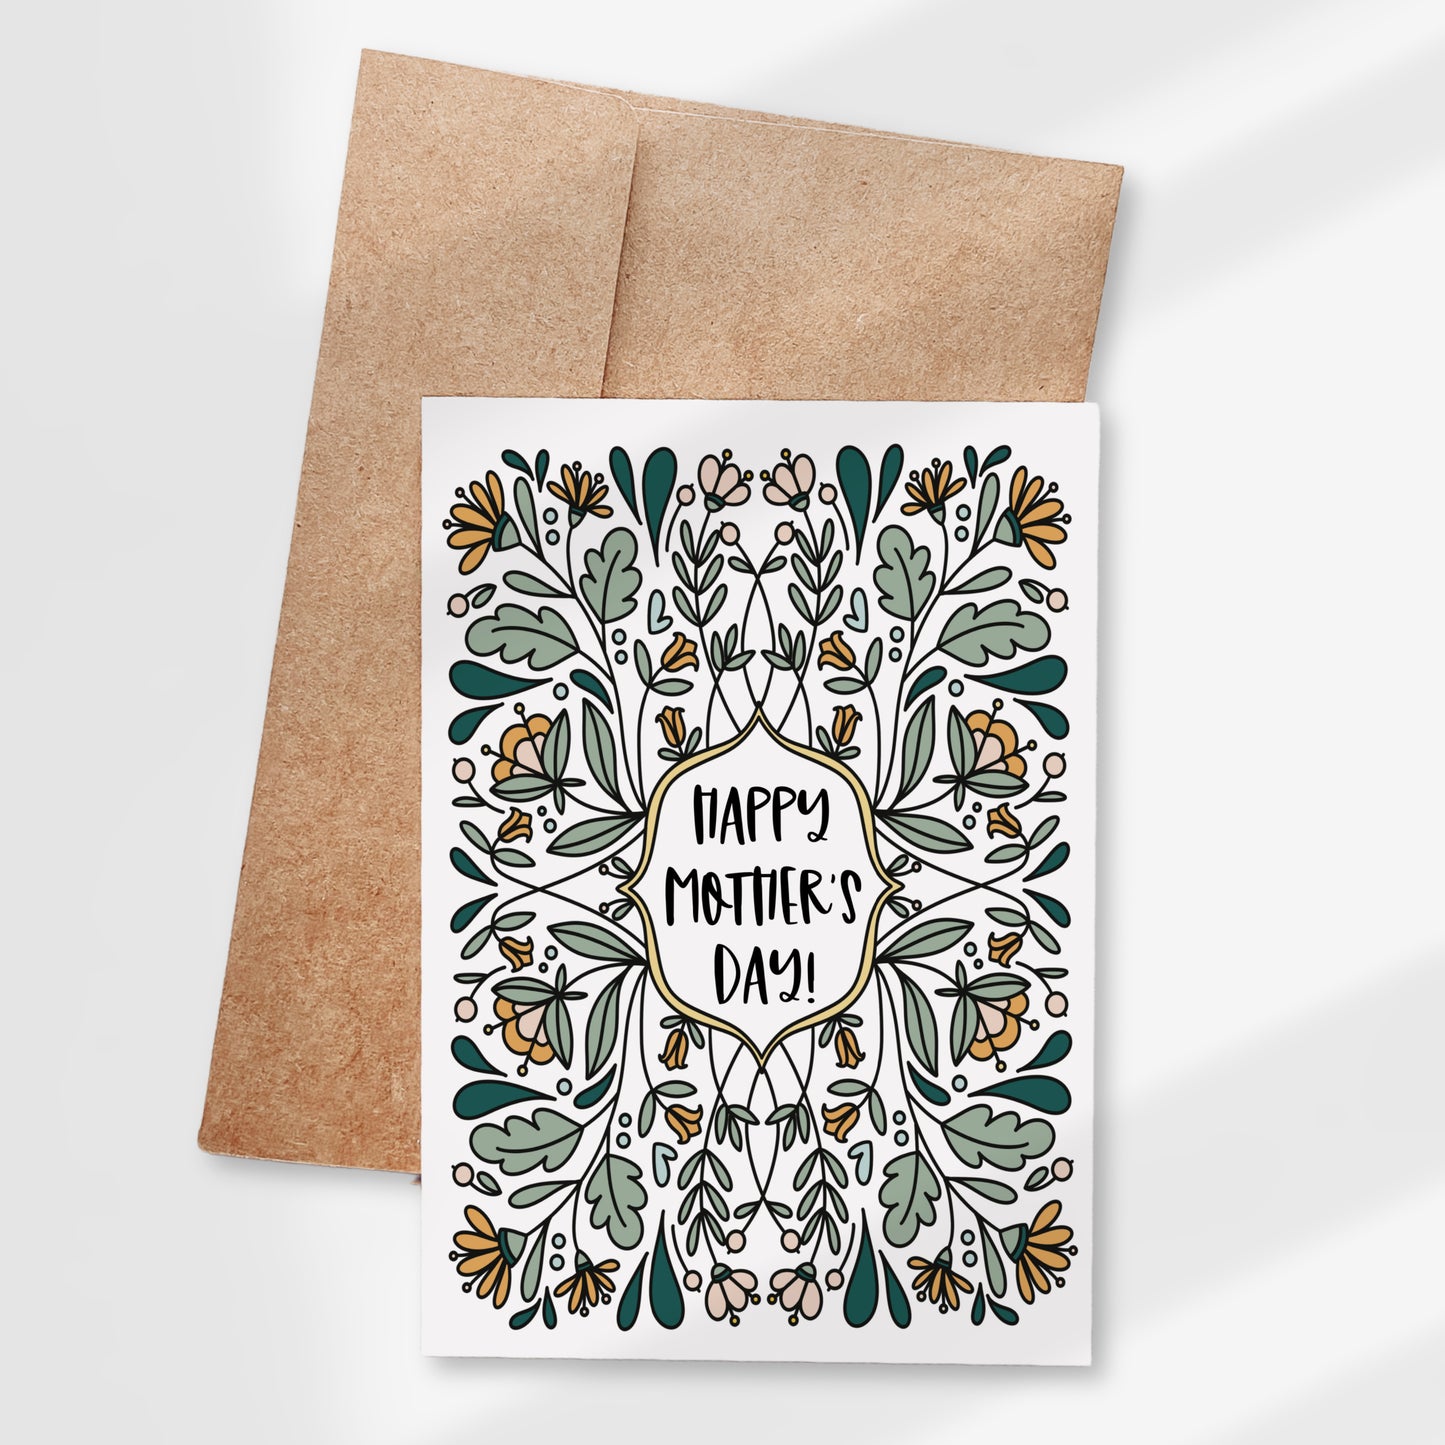 Happy Mother's Day Printable Card | HMD Digital Gift Card | Garden Inspired Card for Mom